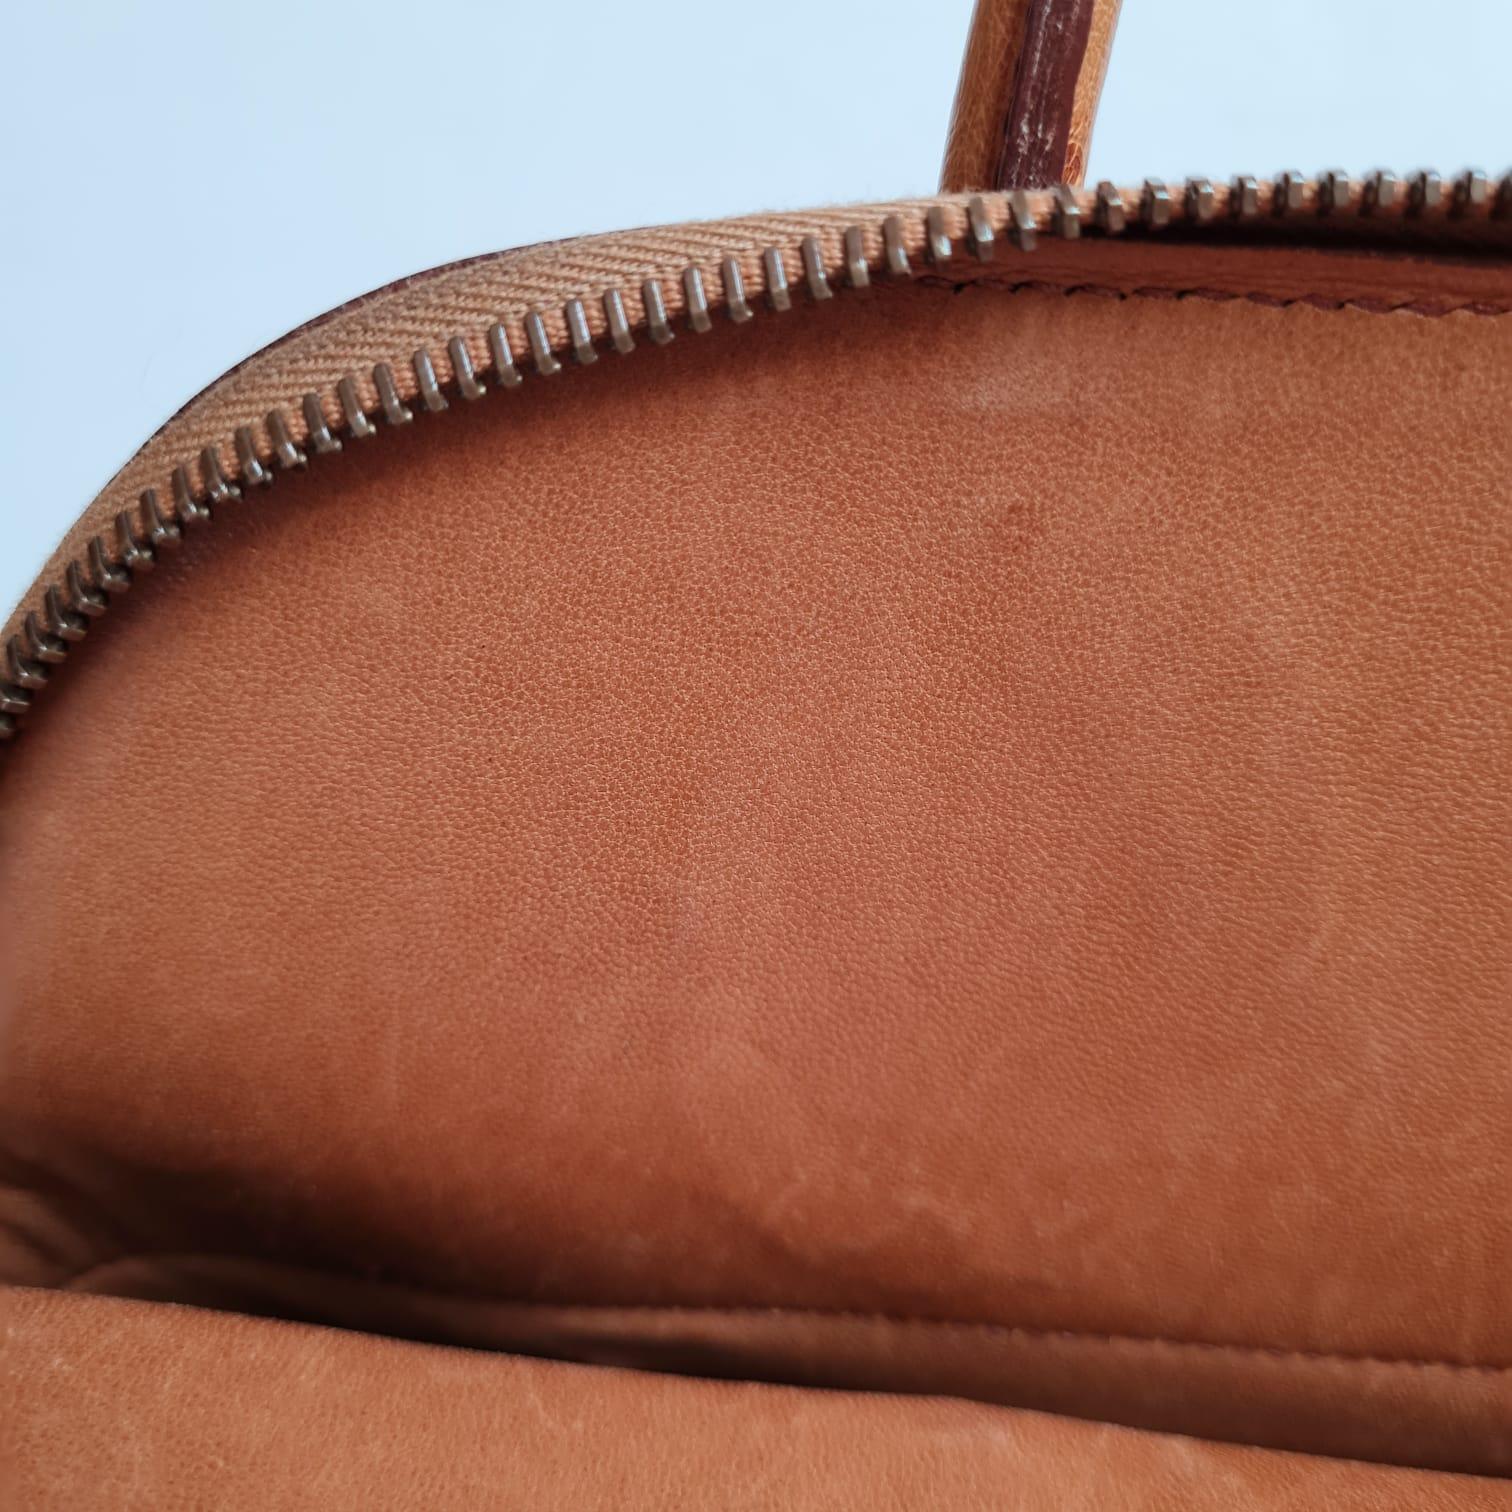 Classic vintage bolide in chestnut colour and gold hardware. Stamp circle Y from 1995. Overall still in good condition, with minor scuffs on some exterior leather and light scratches on the lining. Comes with its dust bag, strap, clochette, padlock